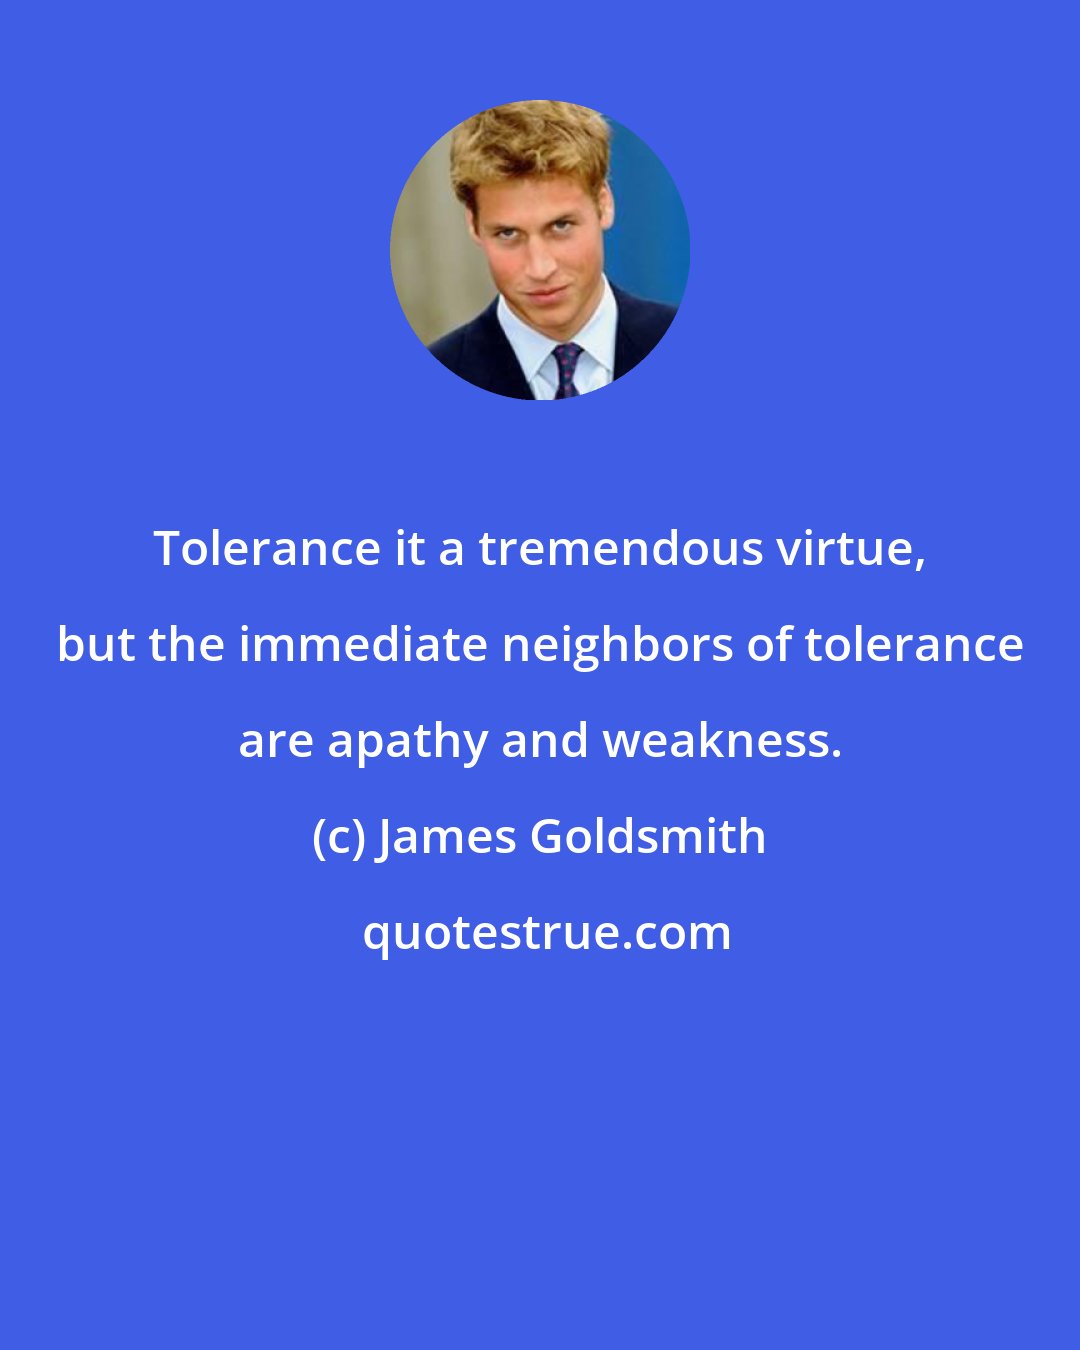 James Goldsmith: Tolerance it a tremendous virtue, but the immediate neighbors of tolerance are apathy and weakness.